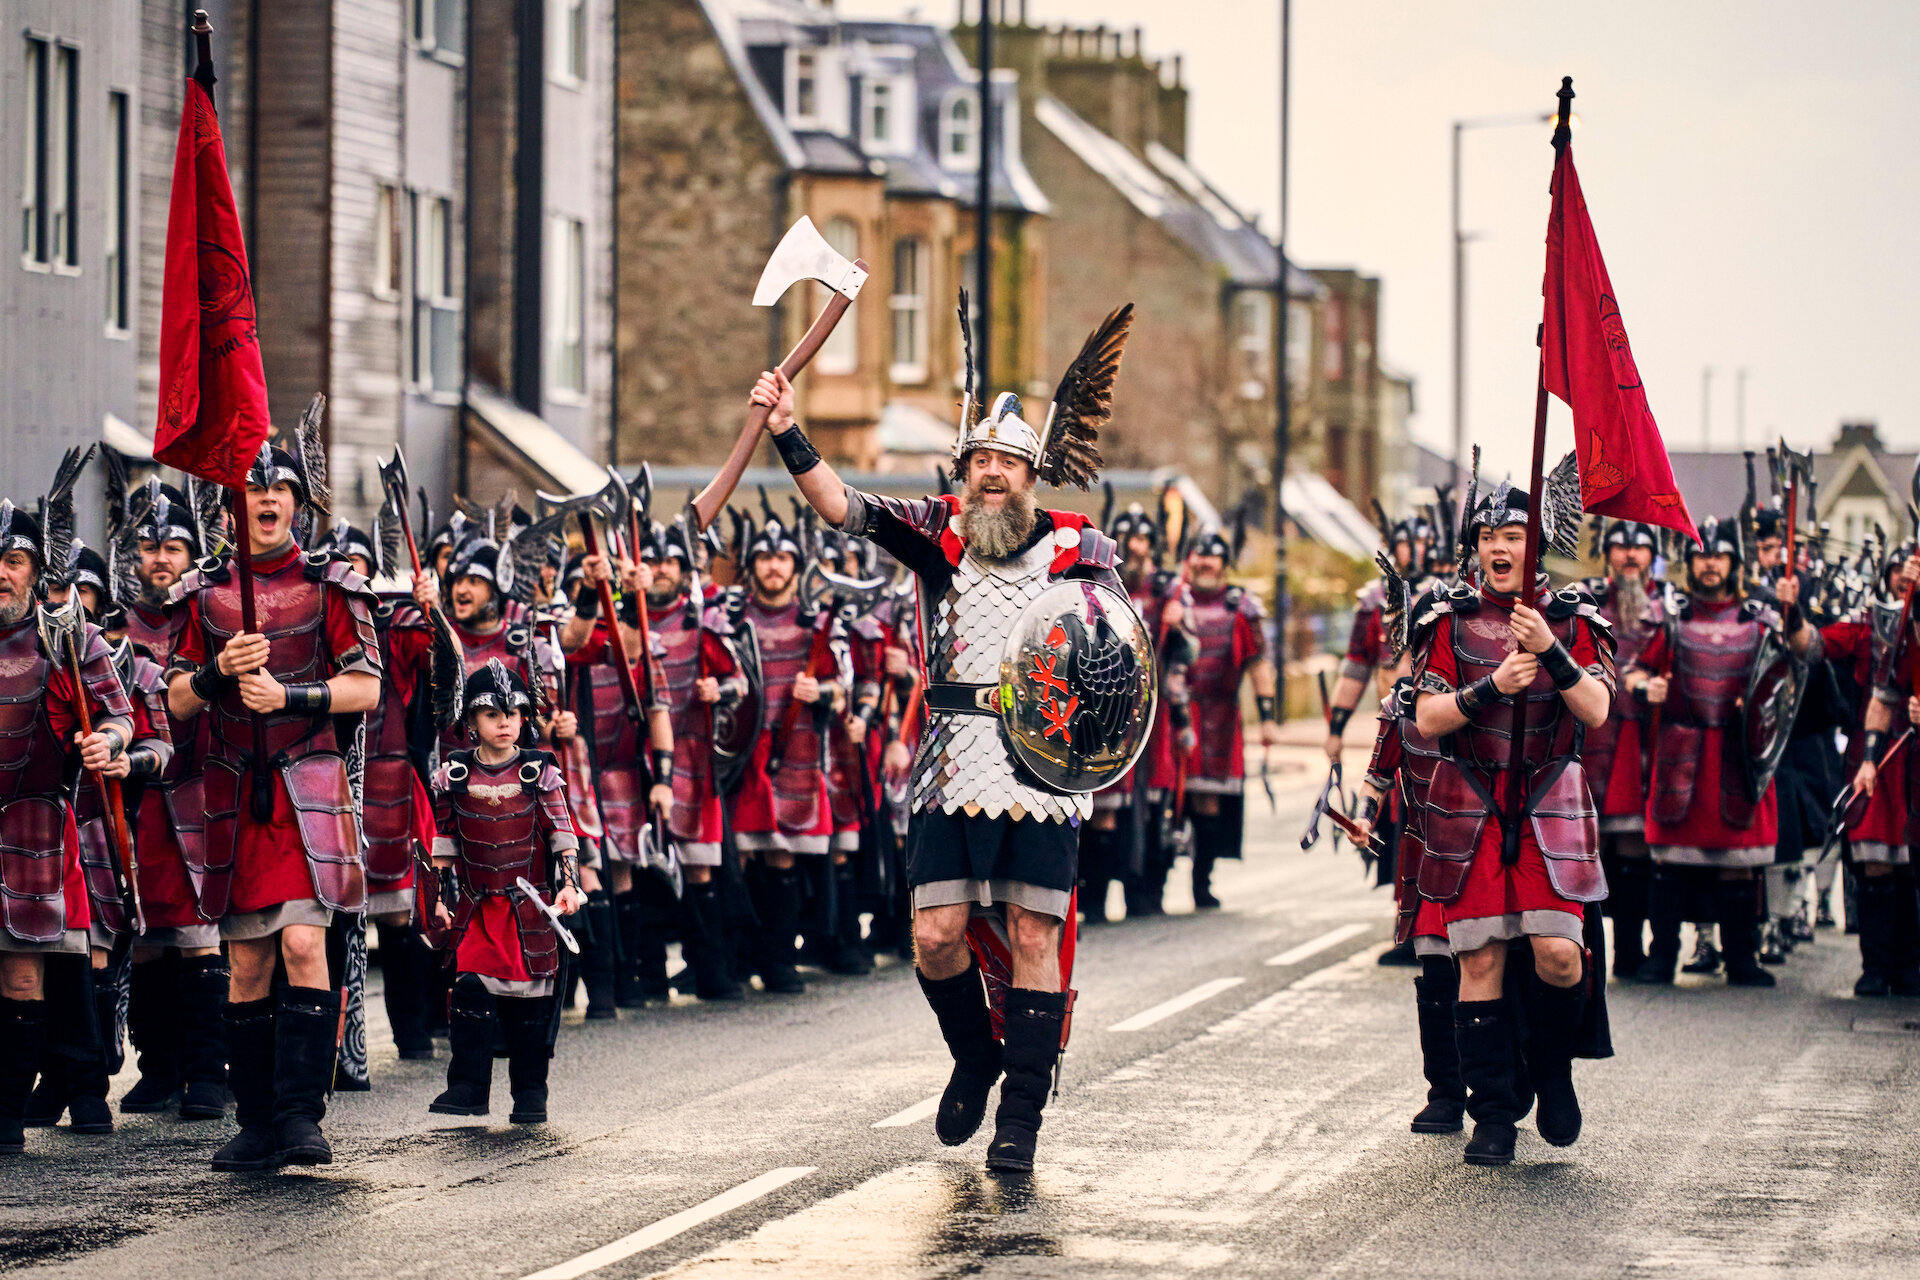 2023 Guizer Jarl, or chief Viking, Neil Moncrieff leading his squad through the streets of Lerwick on 31 January. Photo: Euan Myles/Promote Shetland.